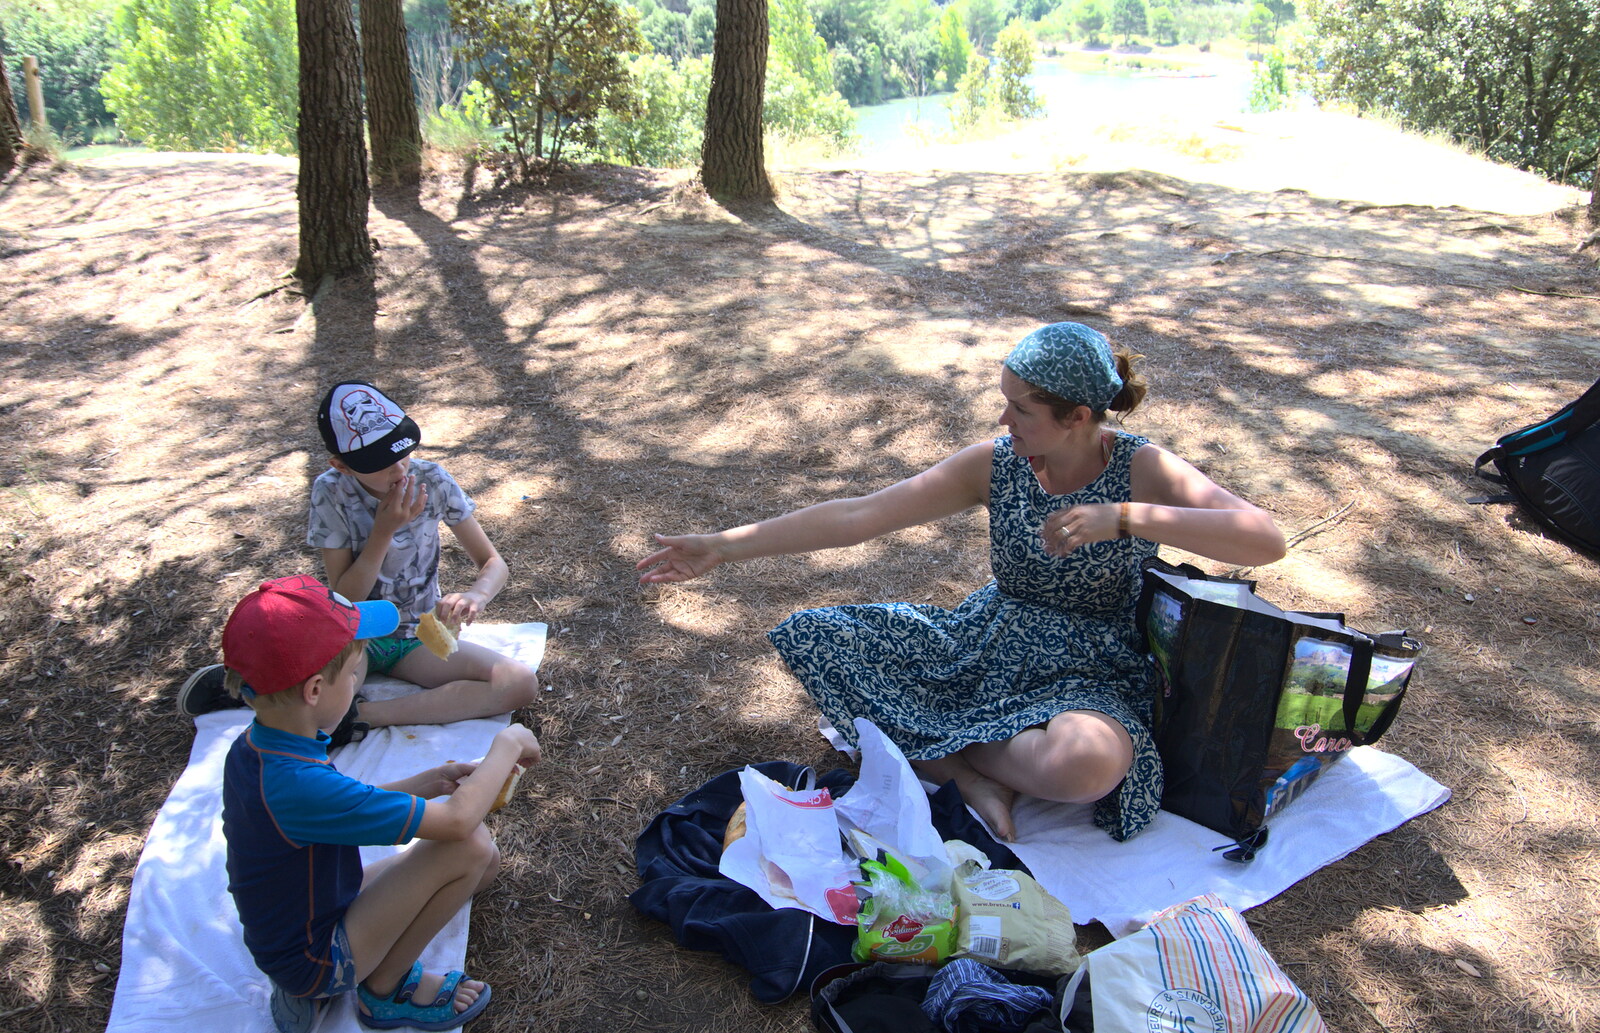 When it gets too hot, we retire to the woods for a picnic from Abbaye Sainte-Marie de Lagrasse and The Lac de la Cavayère, Aude, France - 10th August